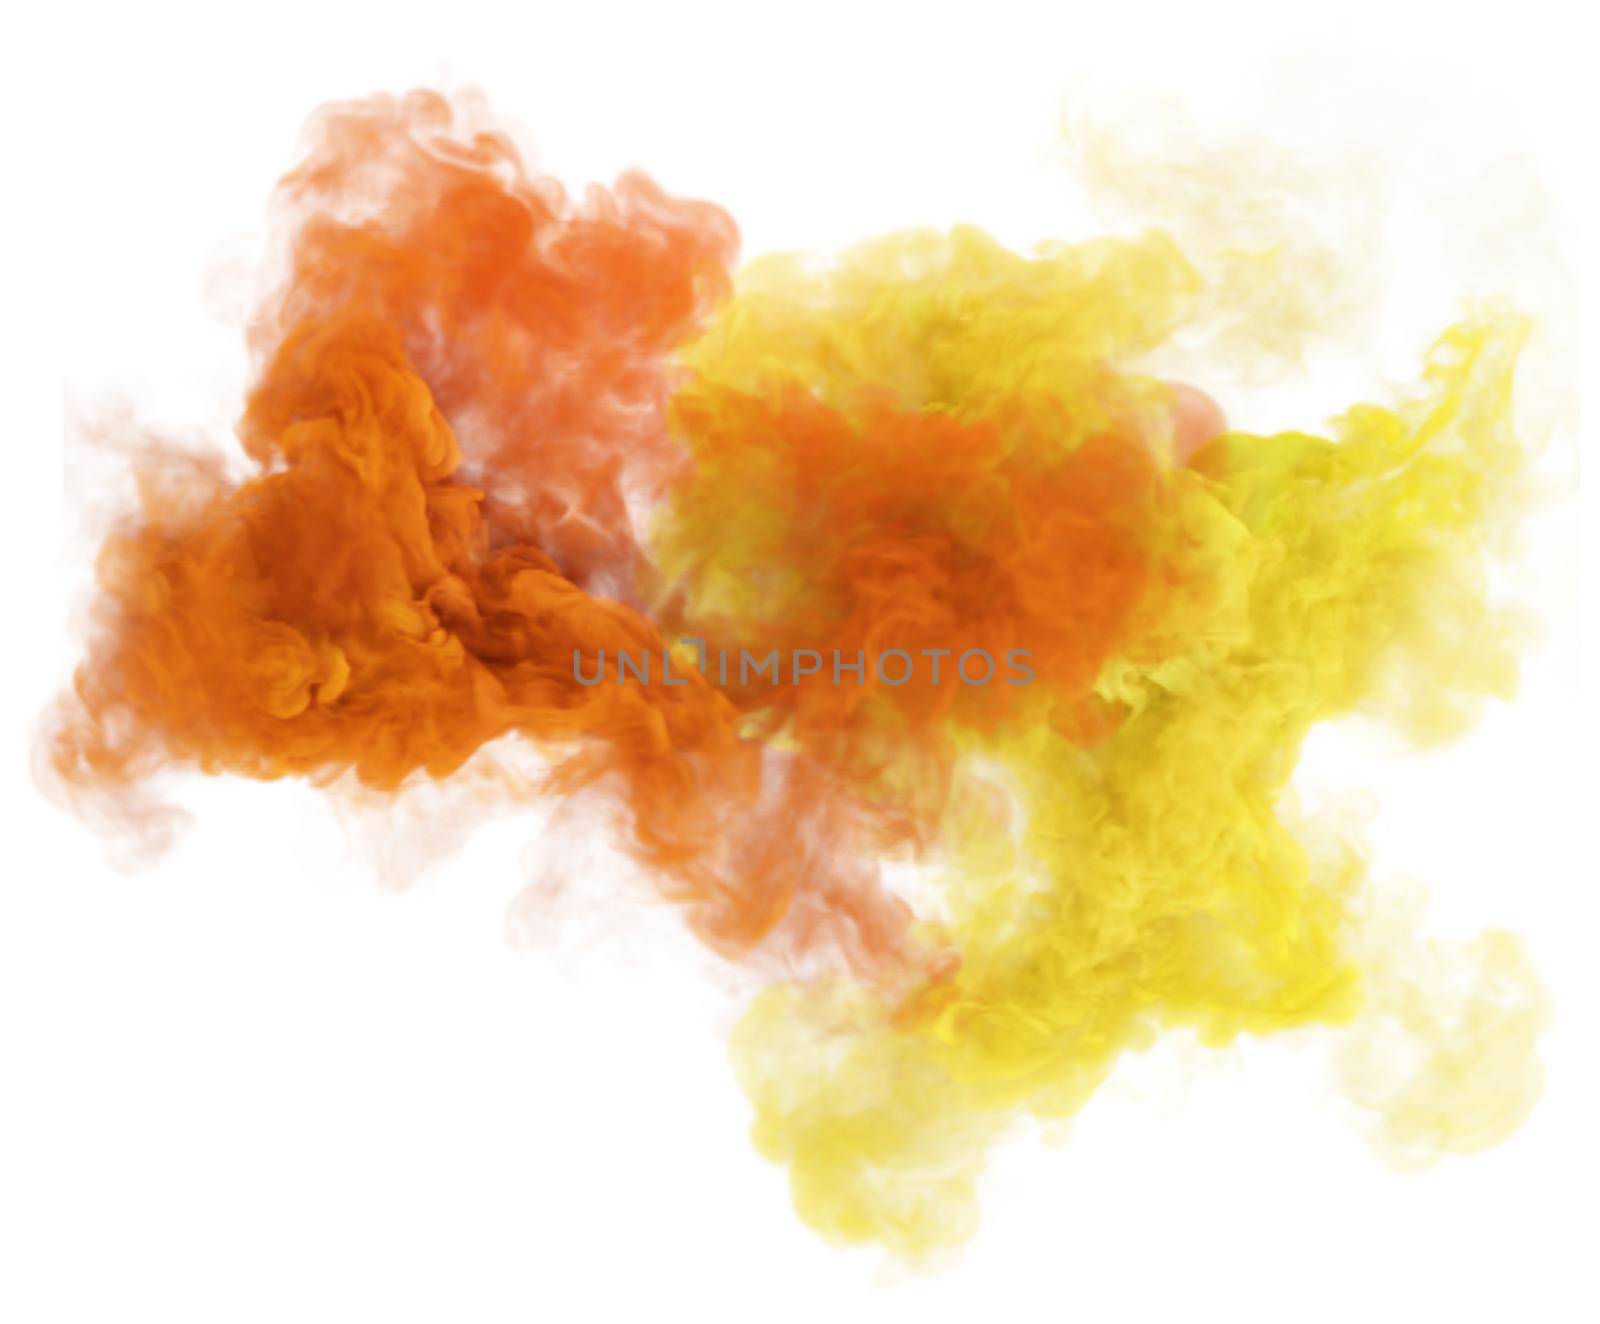 Yellow and red puffs of fantasy smoke. Madic fog texture. Duo colors 3D render abstract background for fan festivals and party